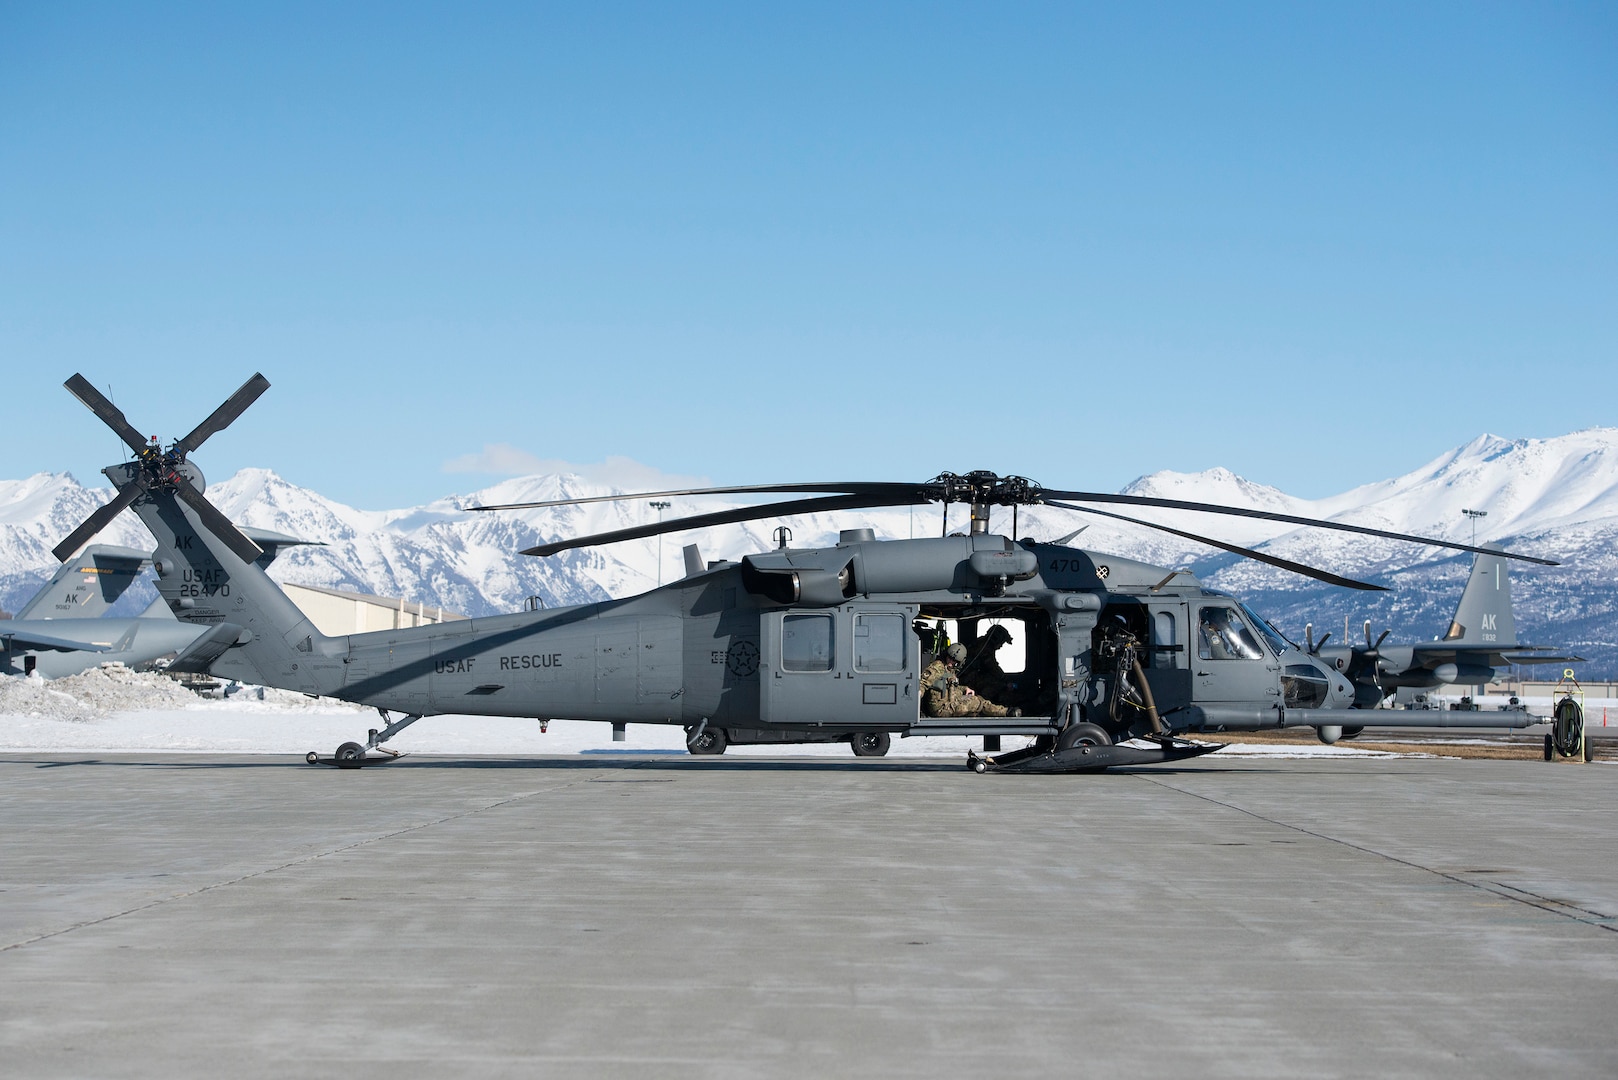 Alaska Air National Guardsmen with the 210th Rescue Squadron prepare to conduct aerial gunnery training at Joint Base Elmendorf-Richardson, Alaska, March 19, 2019. A helicopter from the same unit was involved in rescuing an injured skier April 10, 2019.